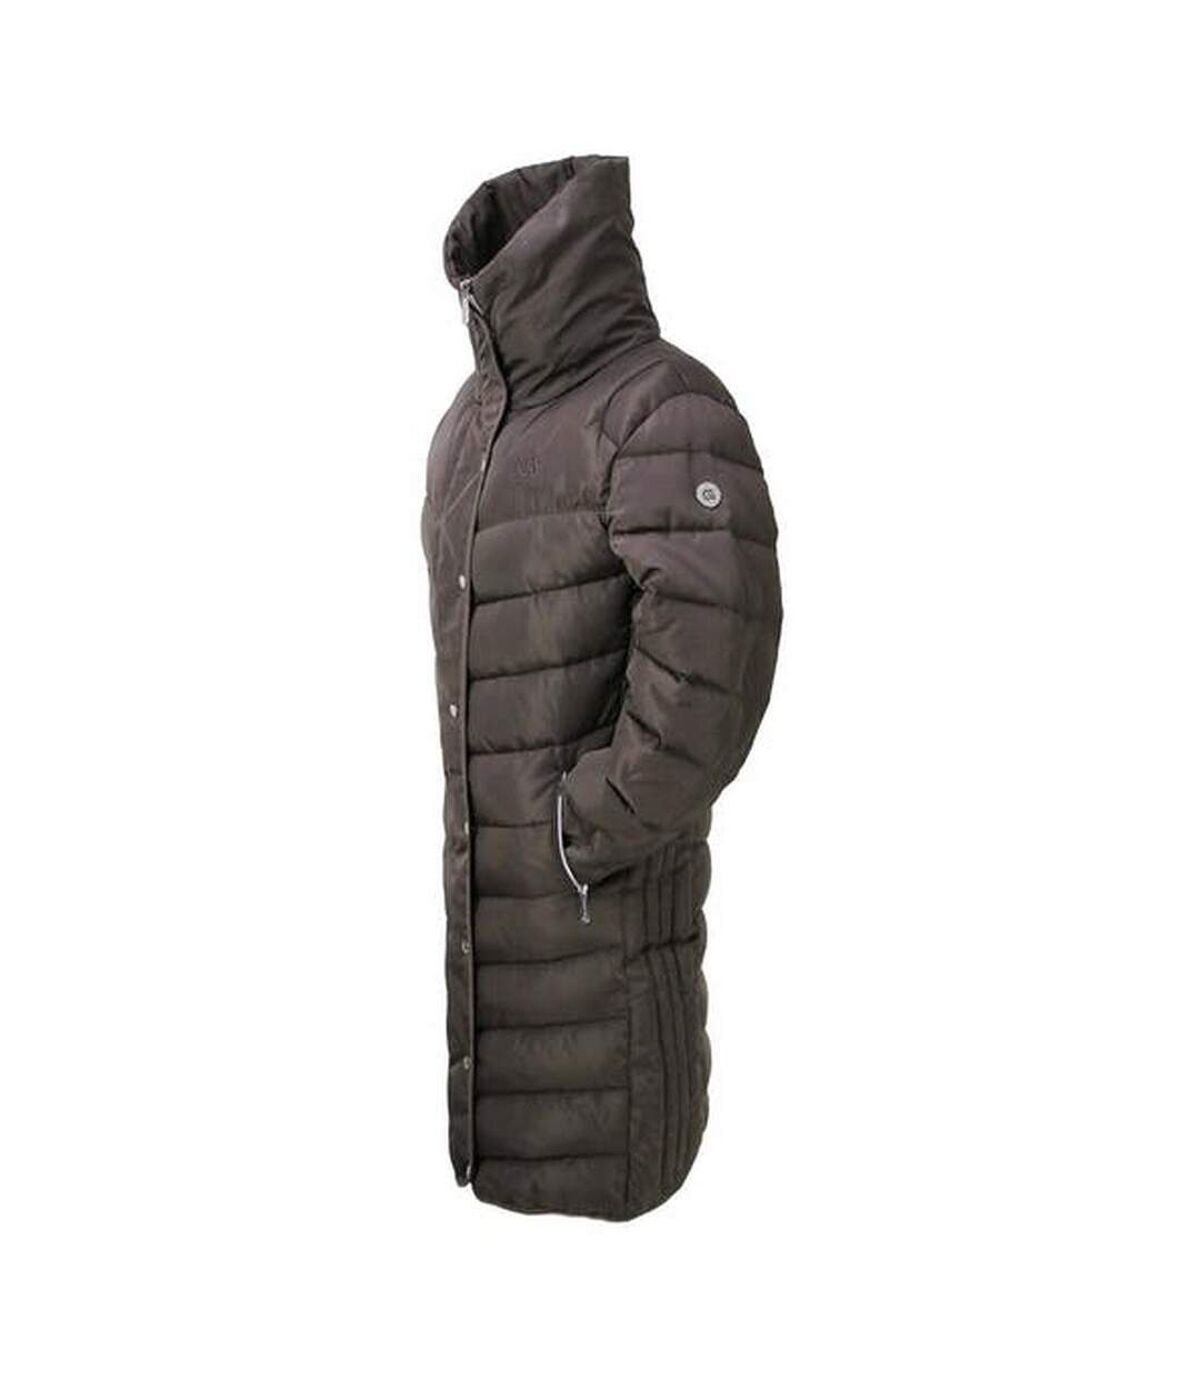 Coldstream Womens/Ladies Kimmerston Long Quilted Coat (Taupe) - UTBZ3512